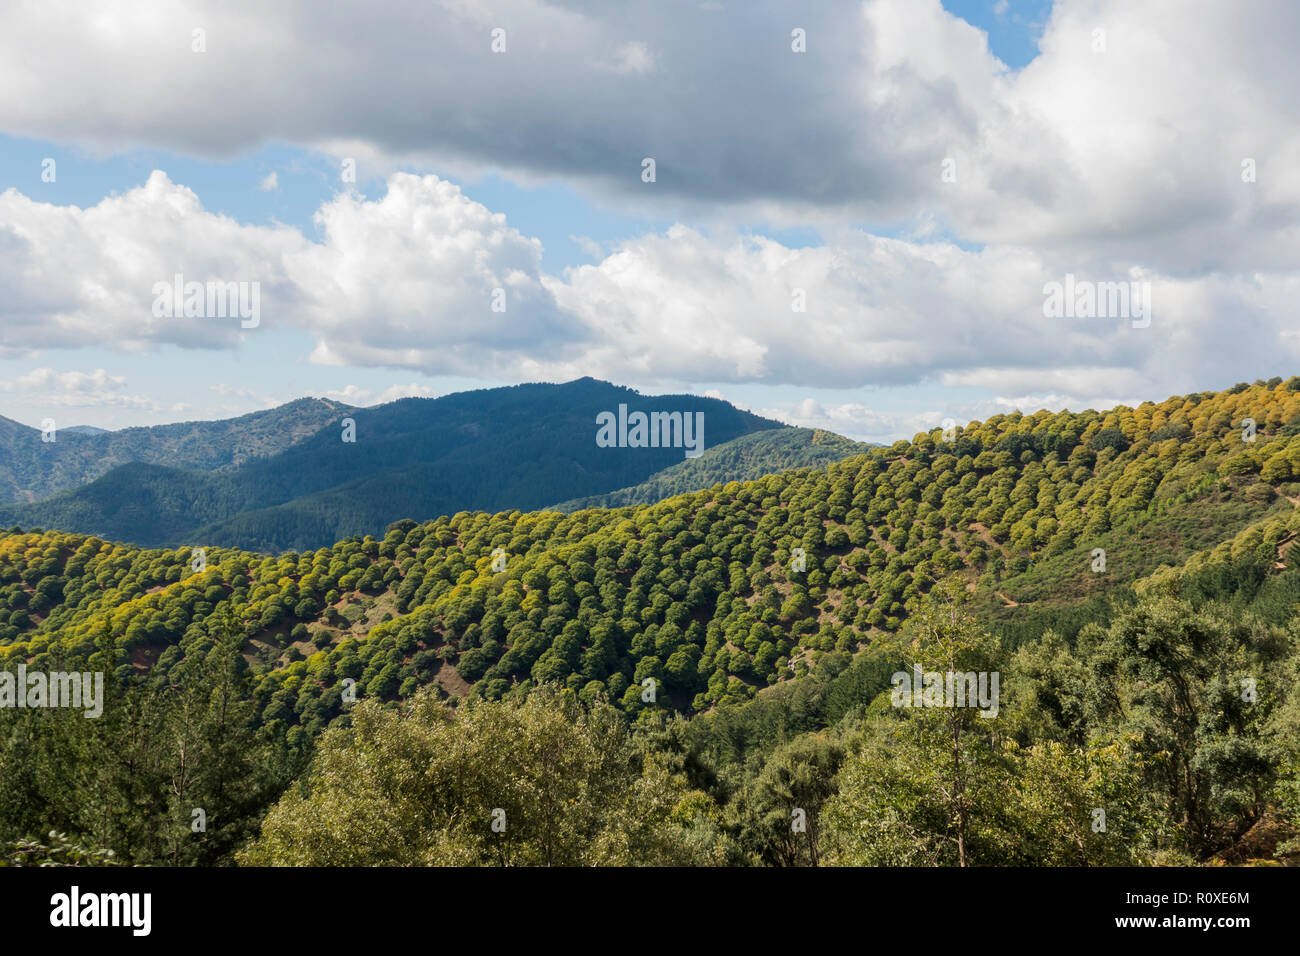 Sweet chestnuts forest covering mountains, Valle de Genal, andalucia, Spain. Stock Photo